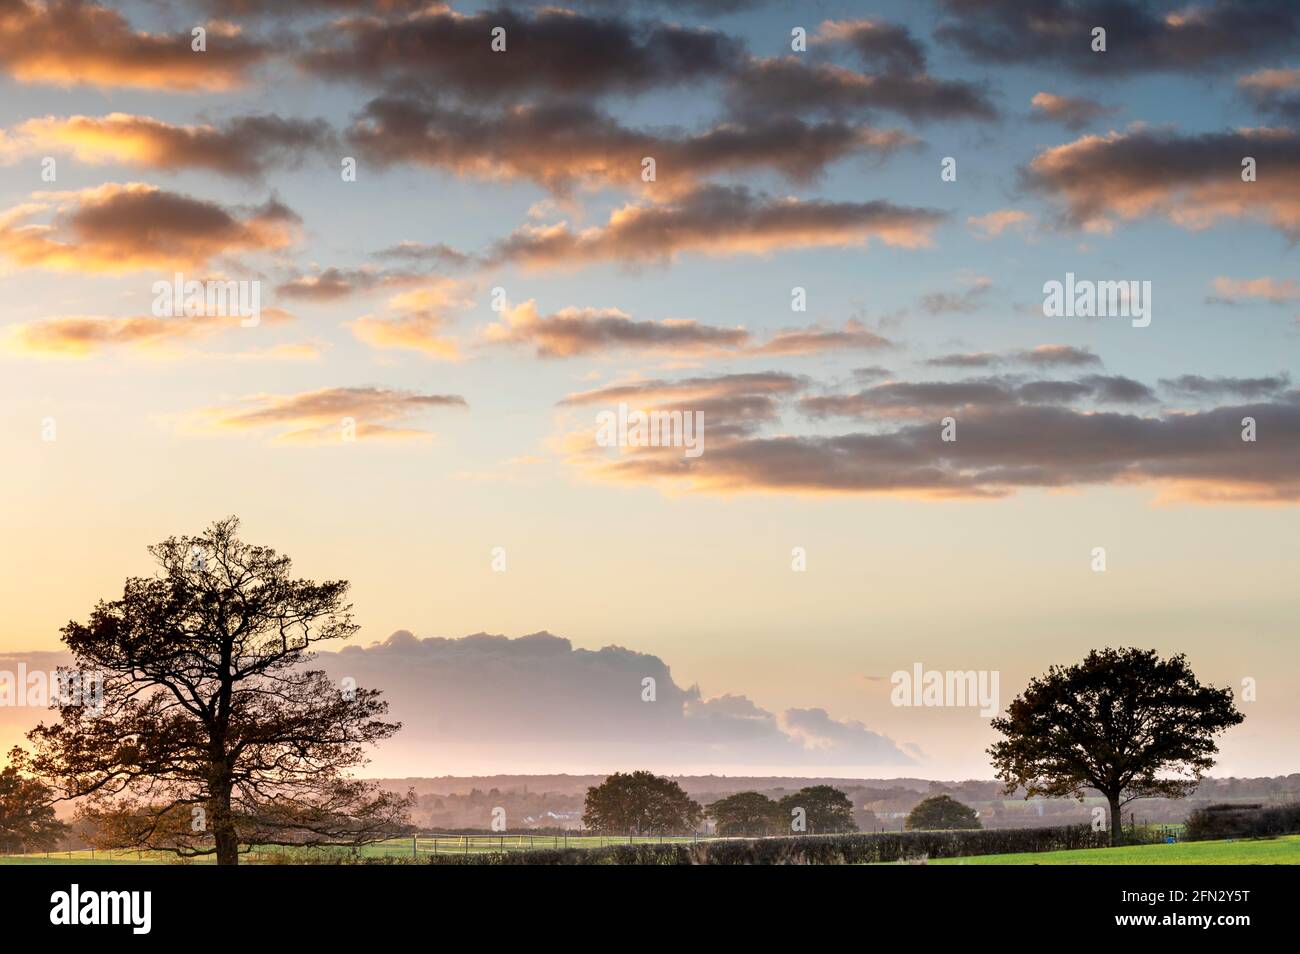 Two silhouetted trees and cool sky scene with warm evening clouds and distant mist Stock Photo